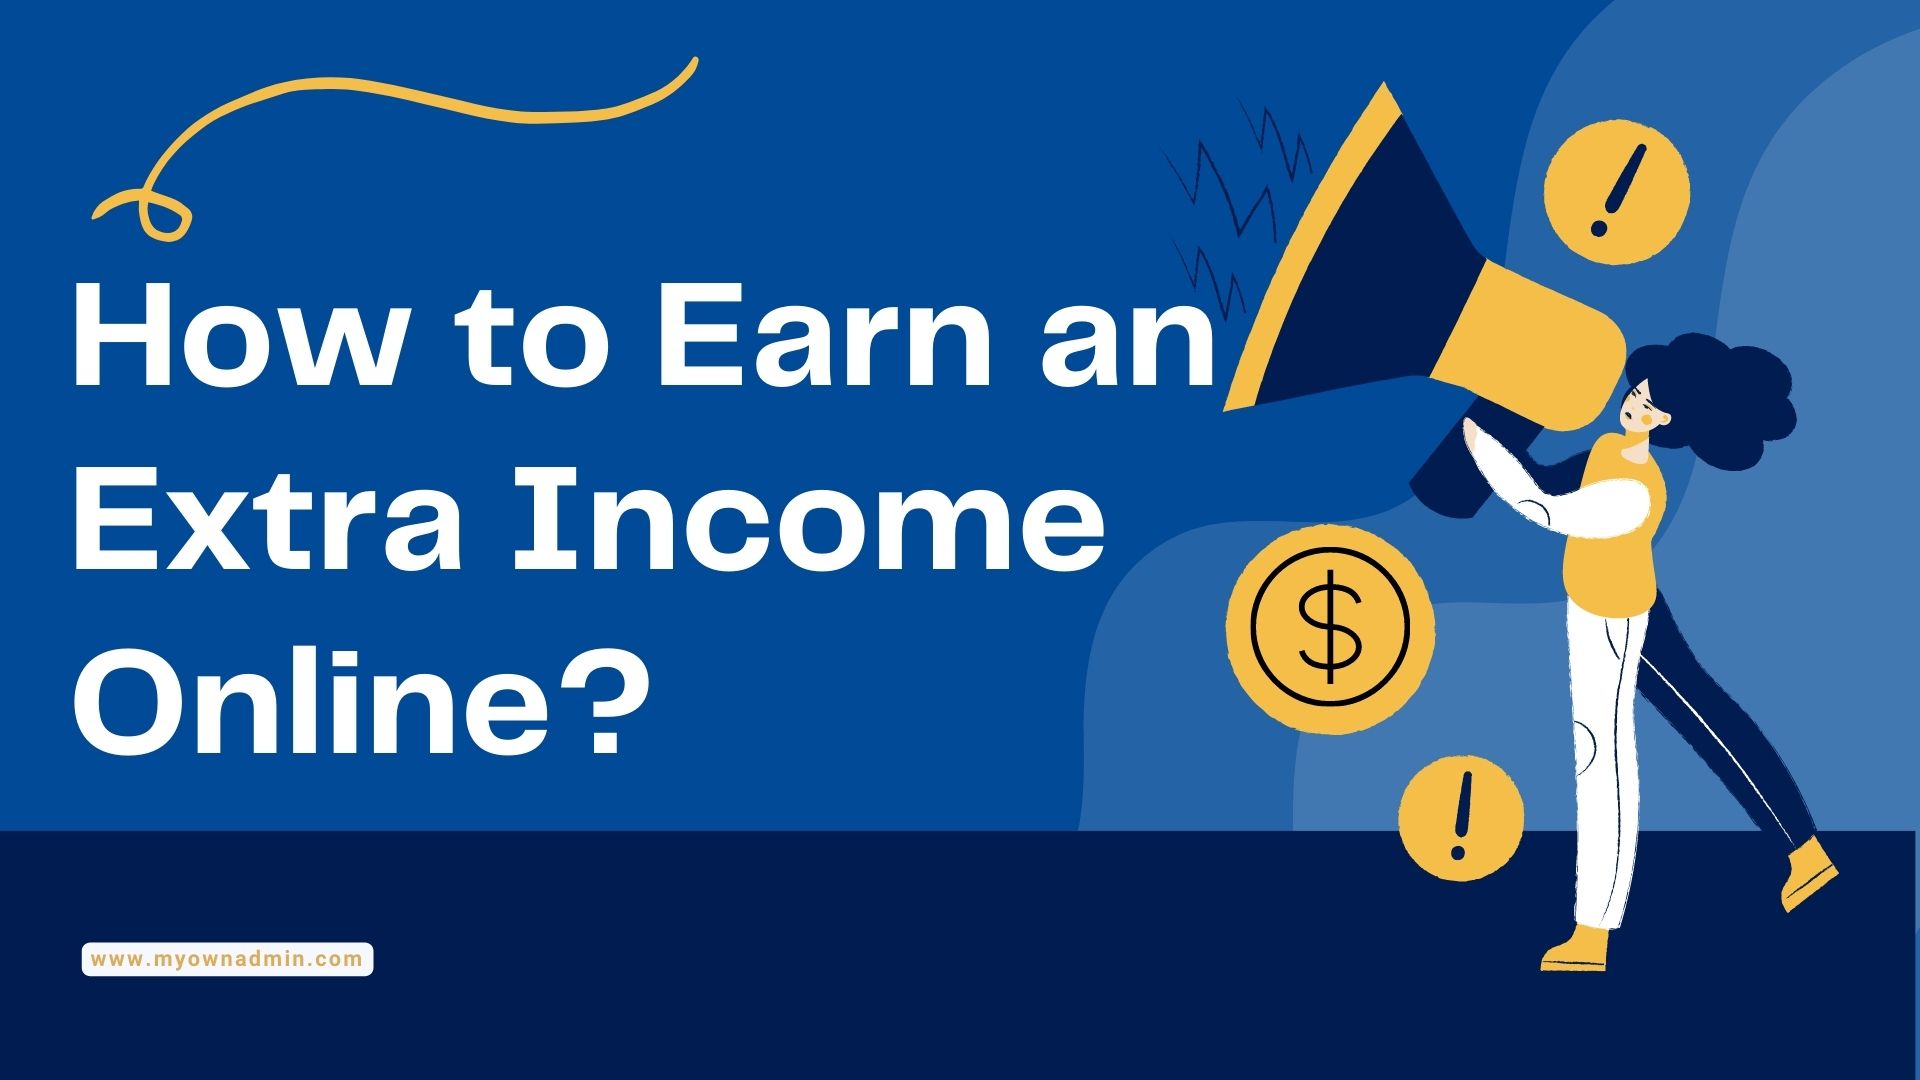 How to Earn an Extra Income Online